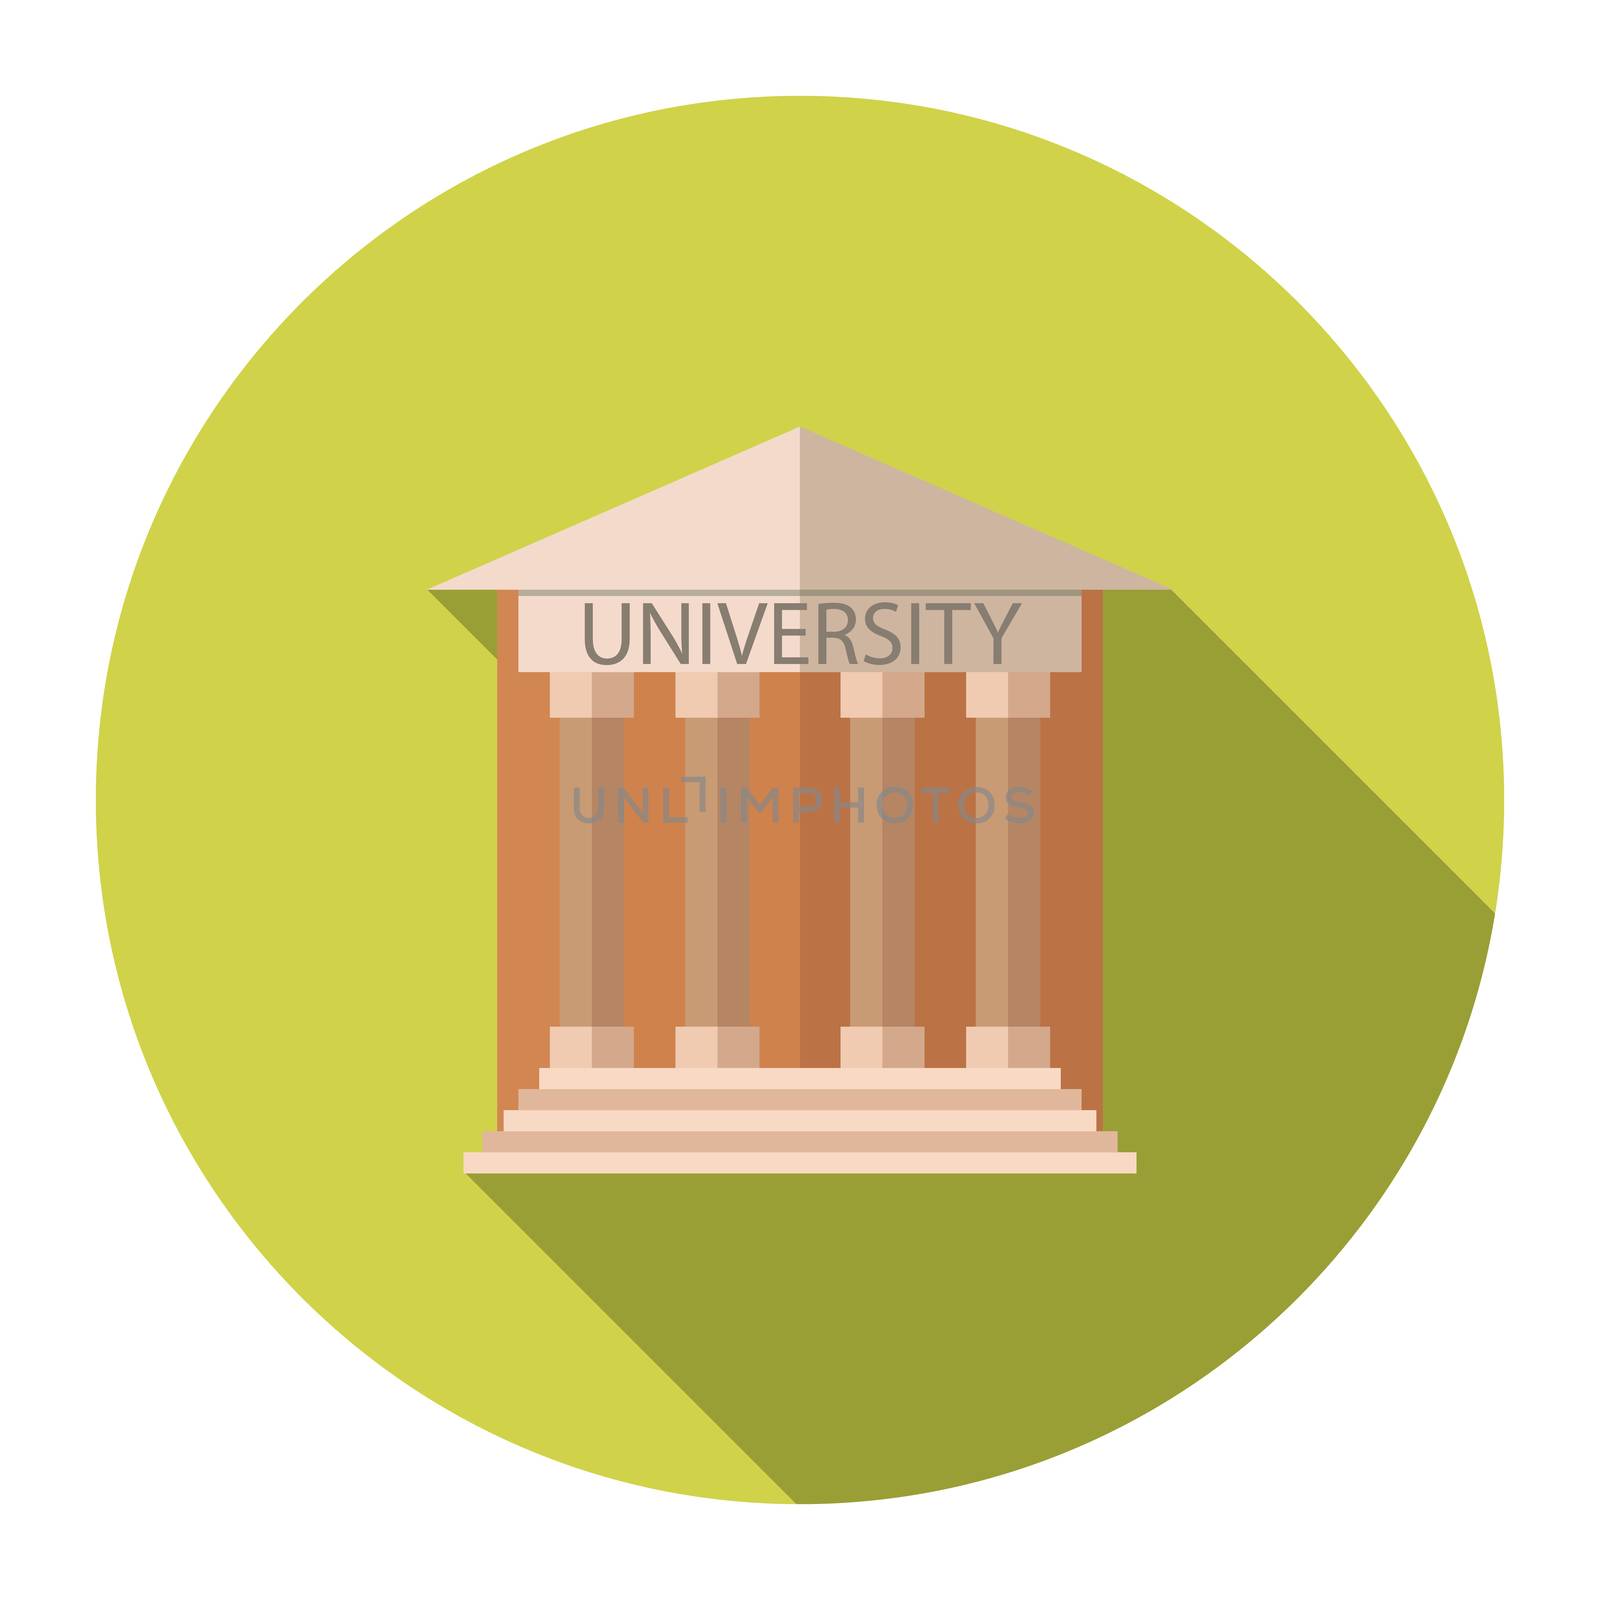 Flat design style vector illustration concept for University building education icon with long shadow.